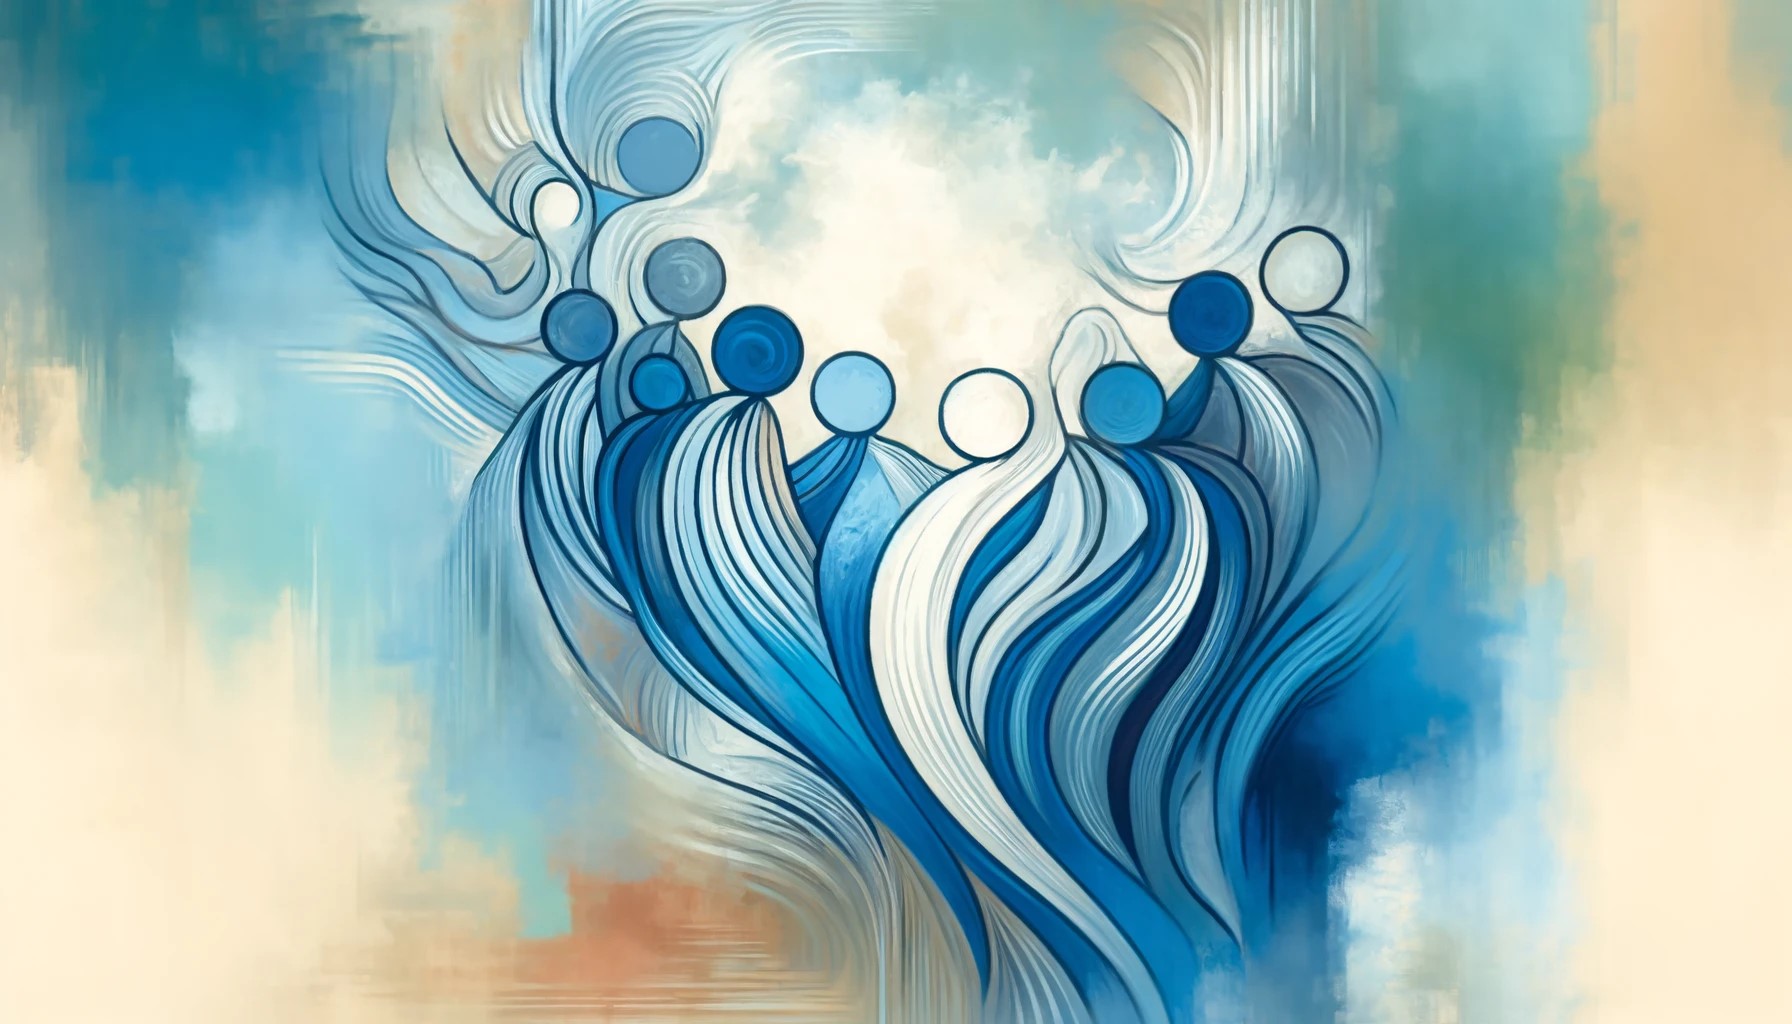 An abstract image symbolizing the concept of reconciliation.